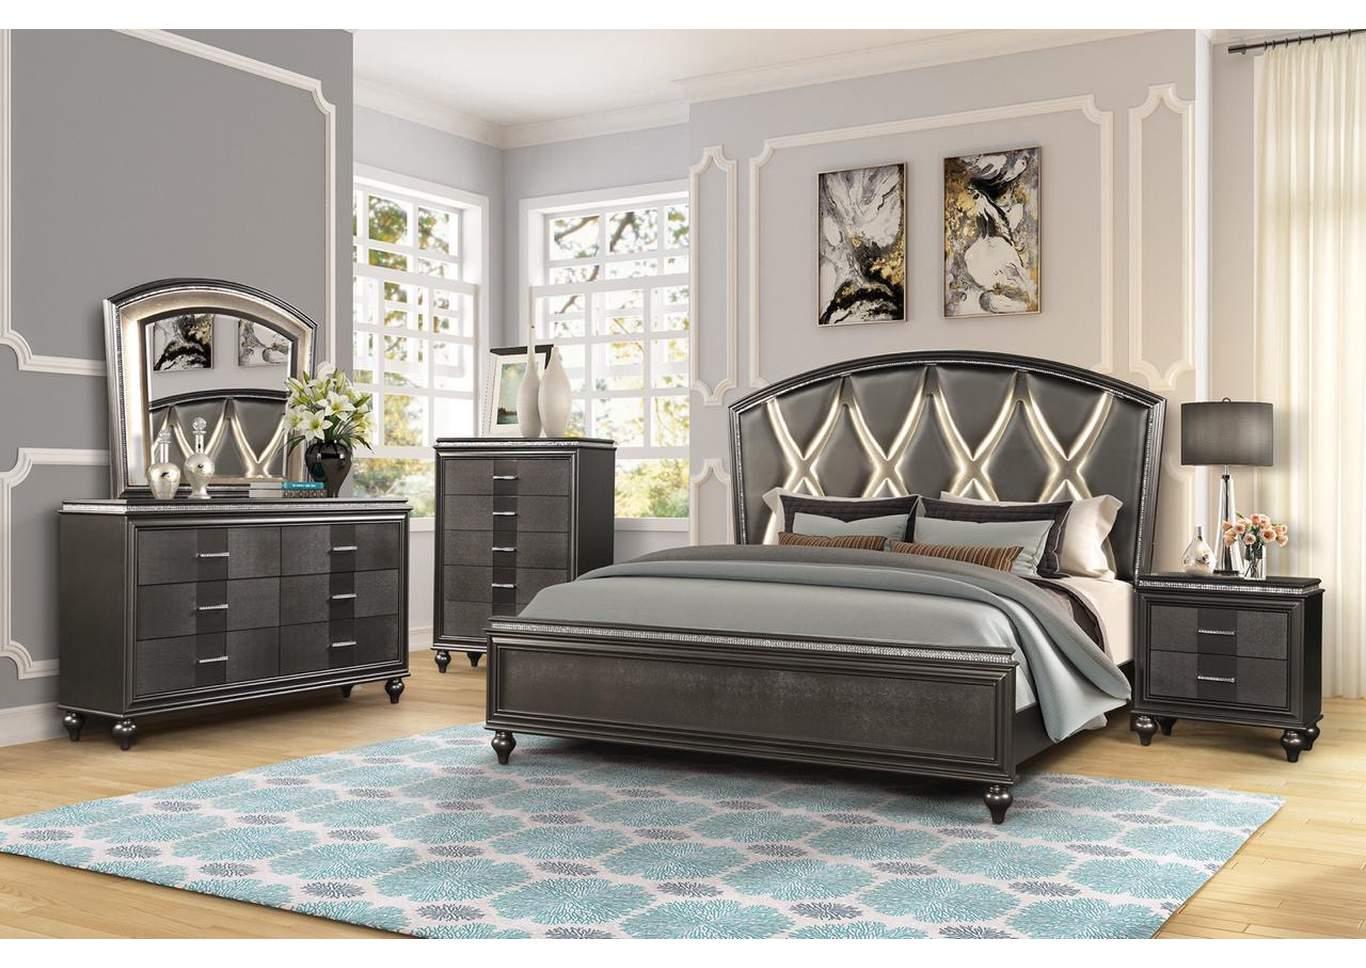 Contemporary, Modern Panel Bedroom Set GINGER GHF-808857763235 in Gunmetal Eco Leather